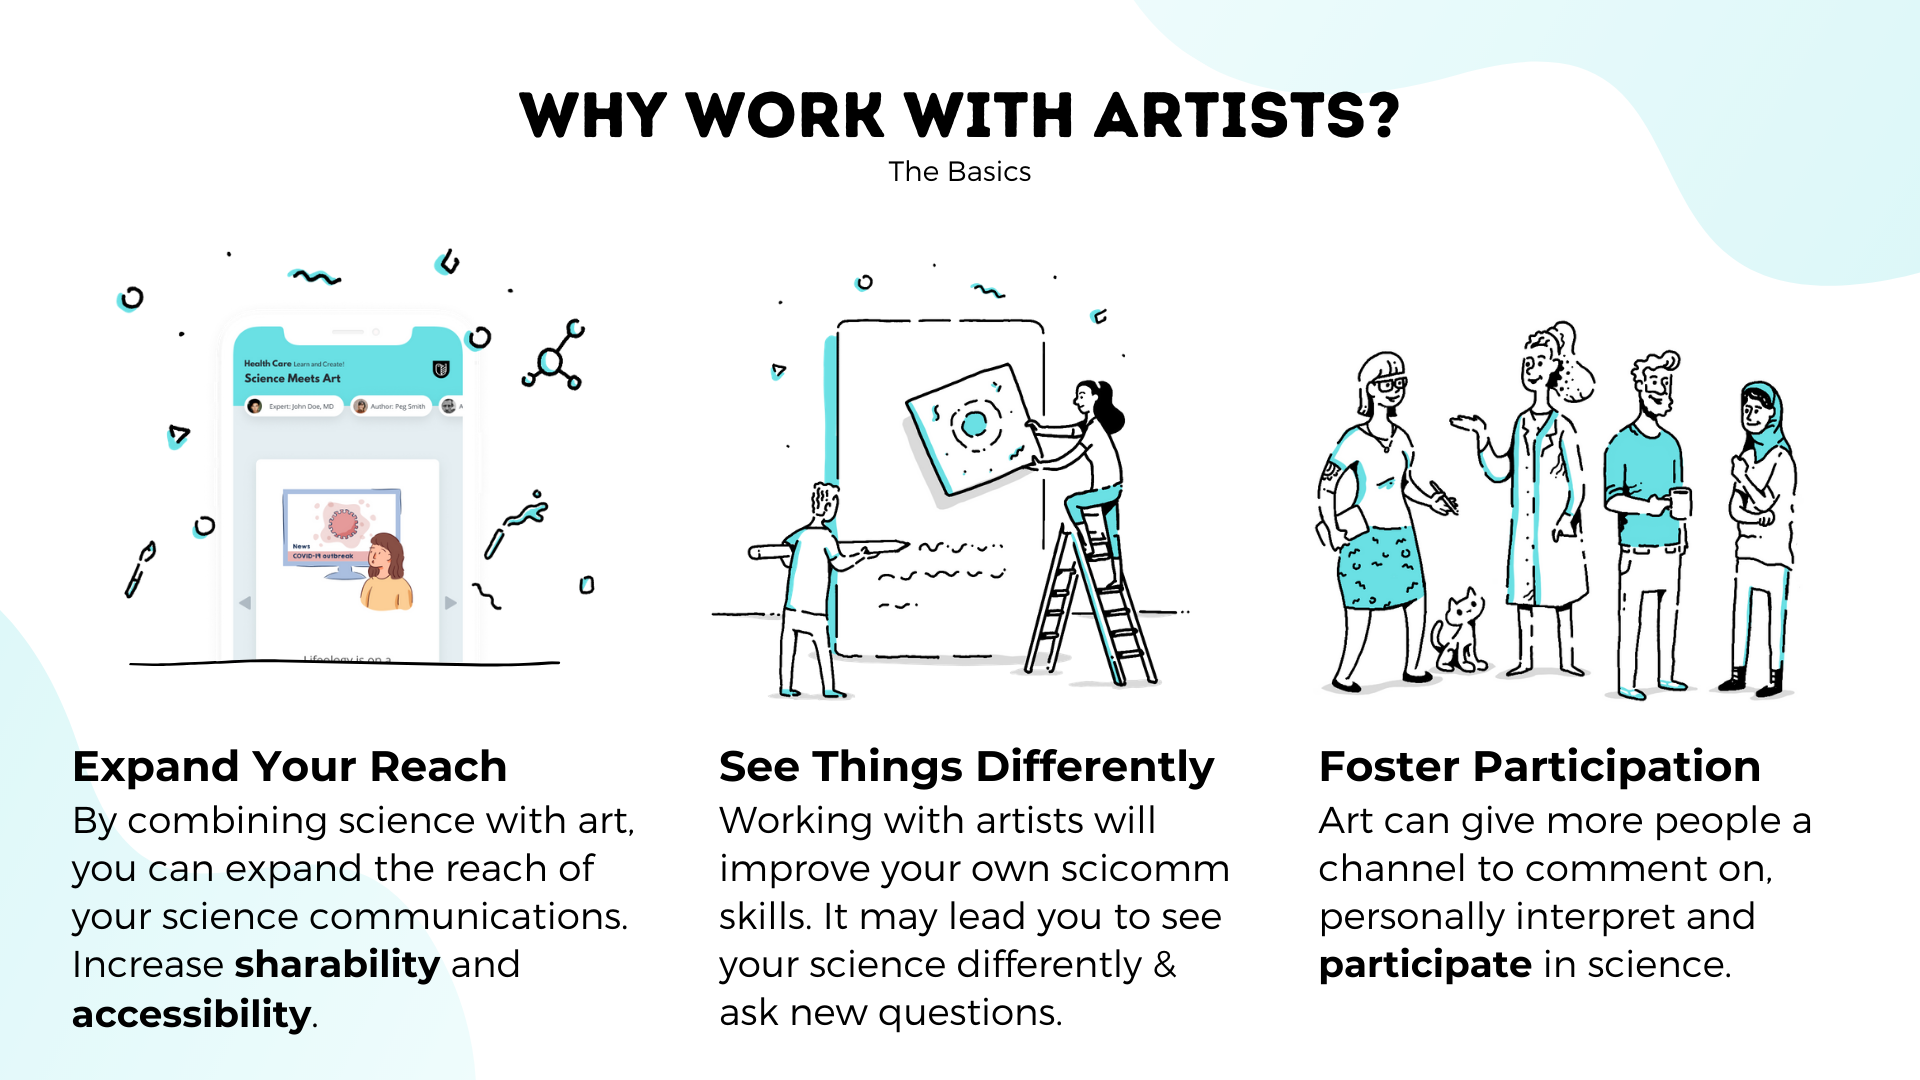 Work with artists to expand your reach, see things differently, and foster participation